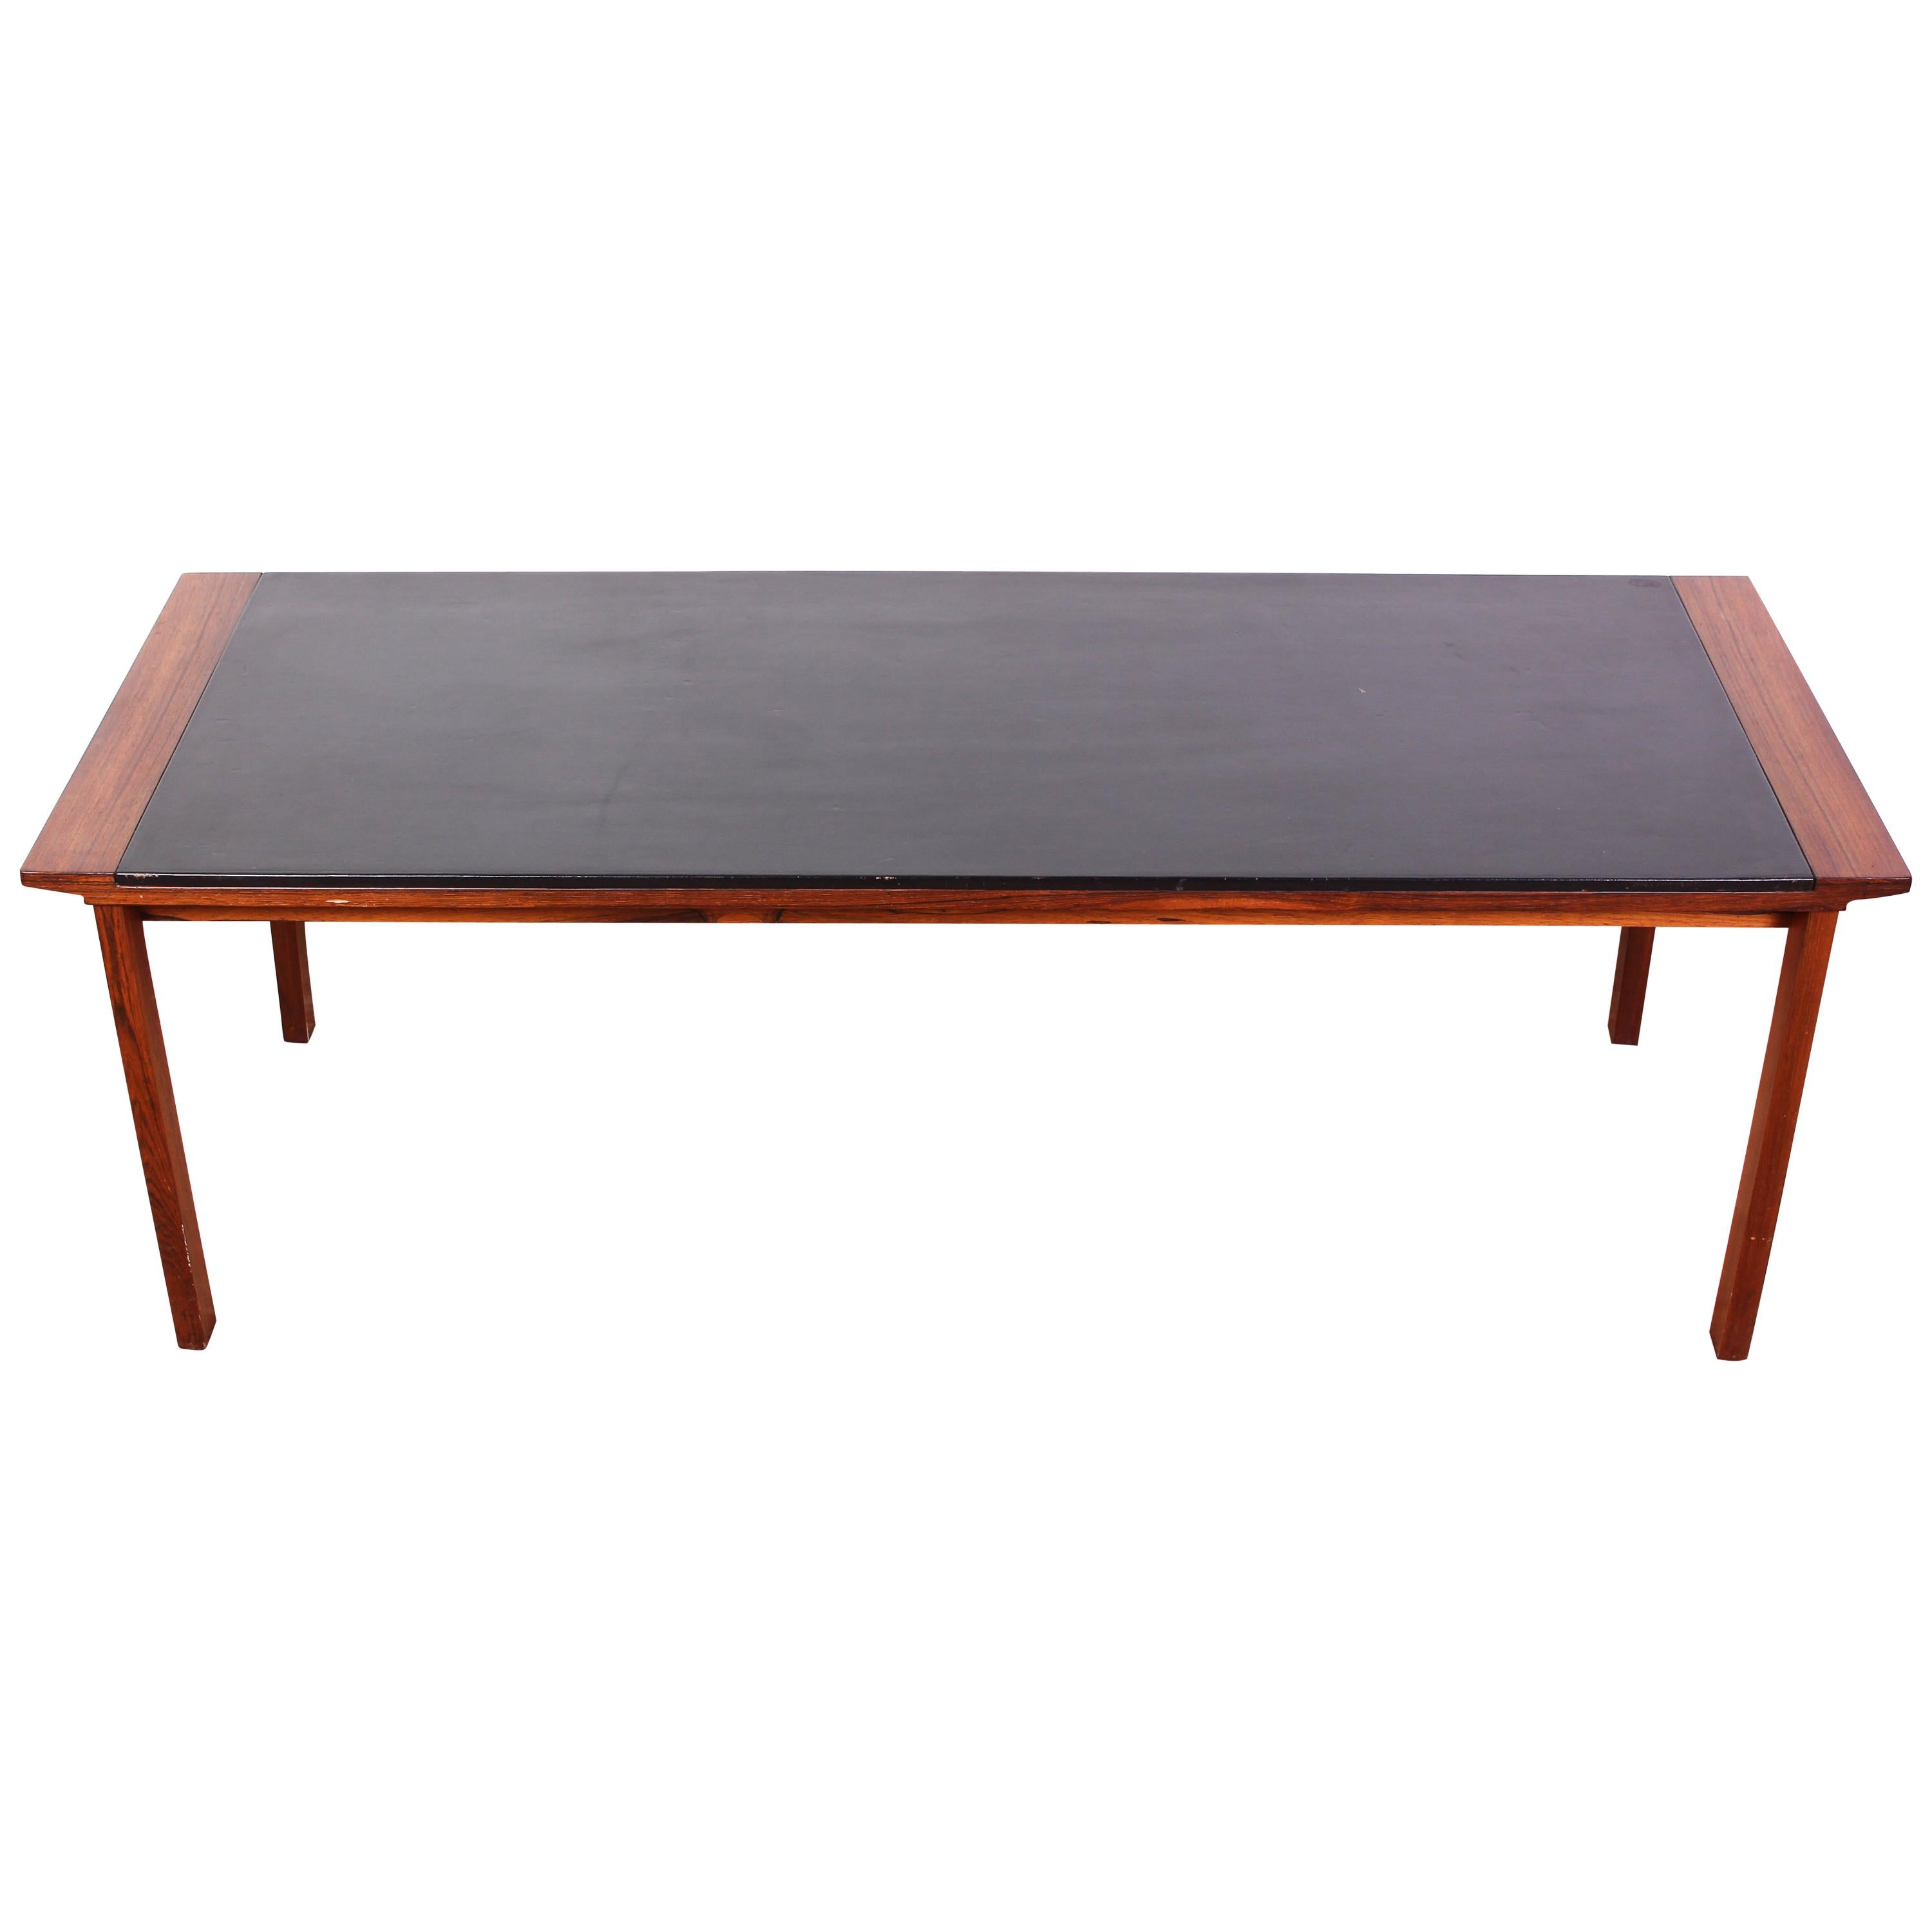 Midcentury Danish Rosewood Coffee Table with Leather Top For Sale